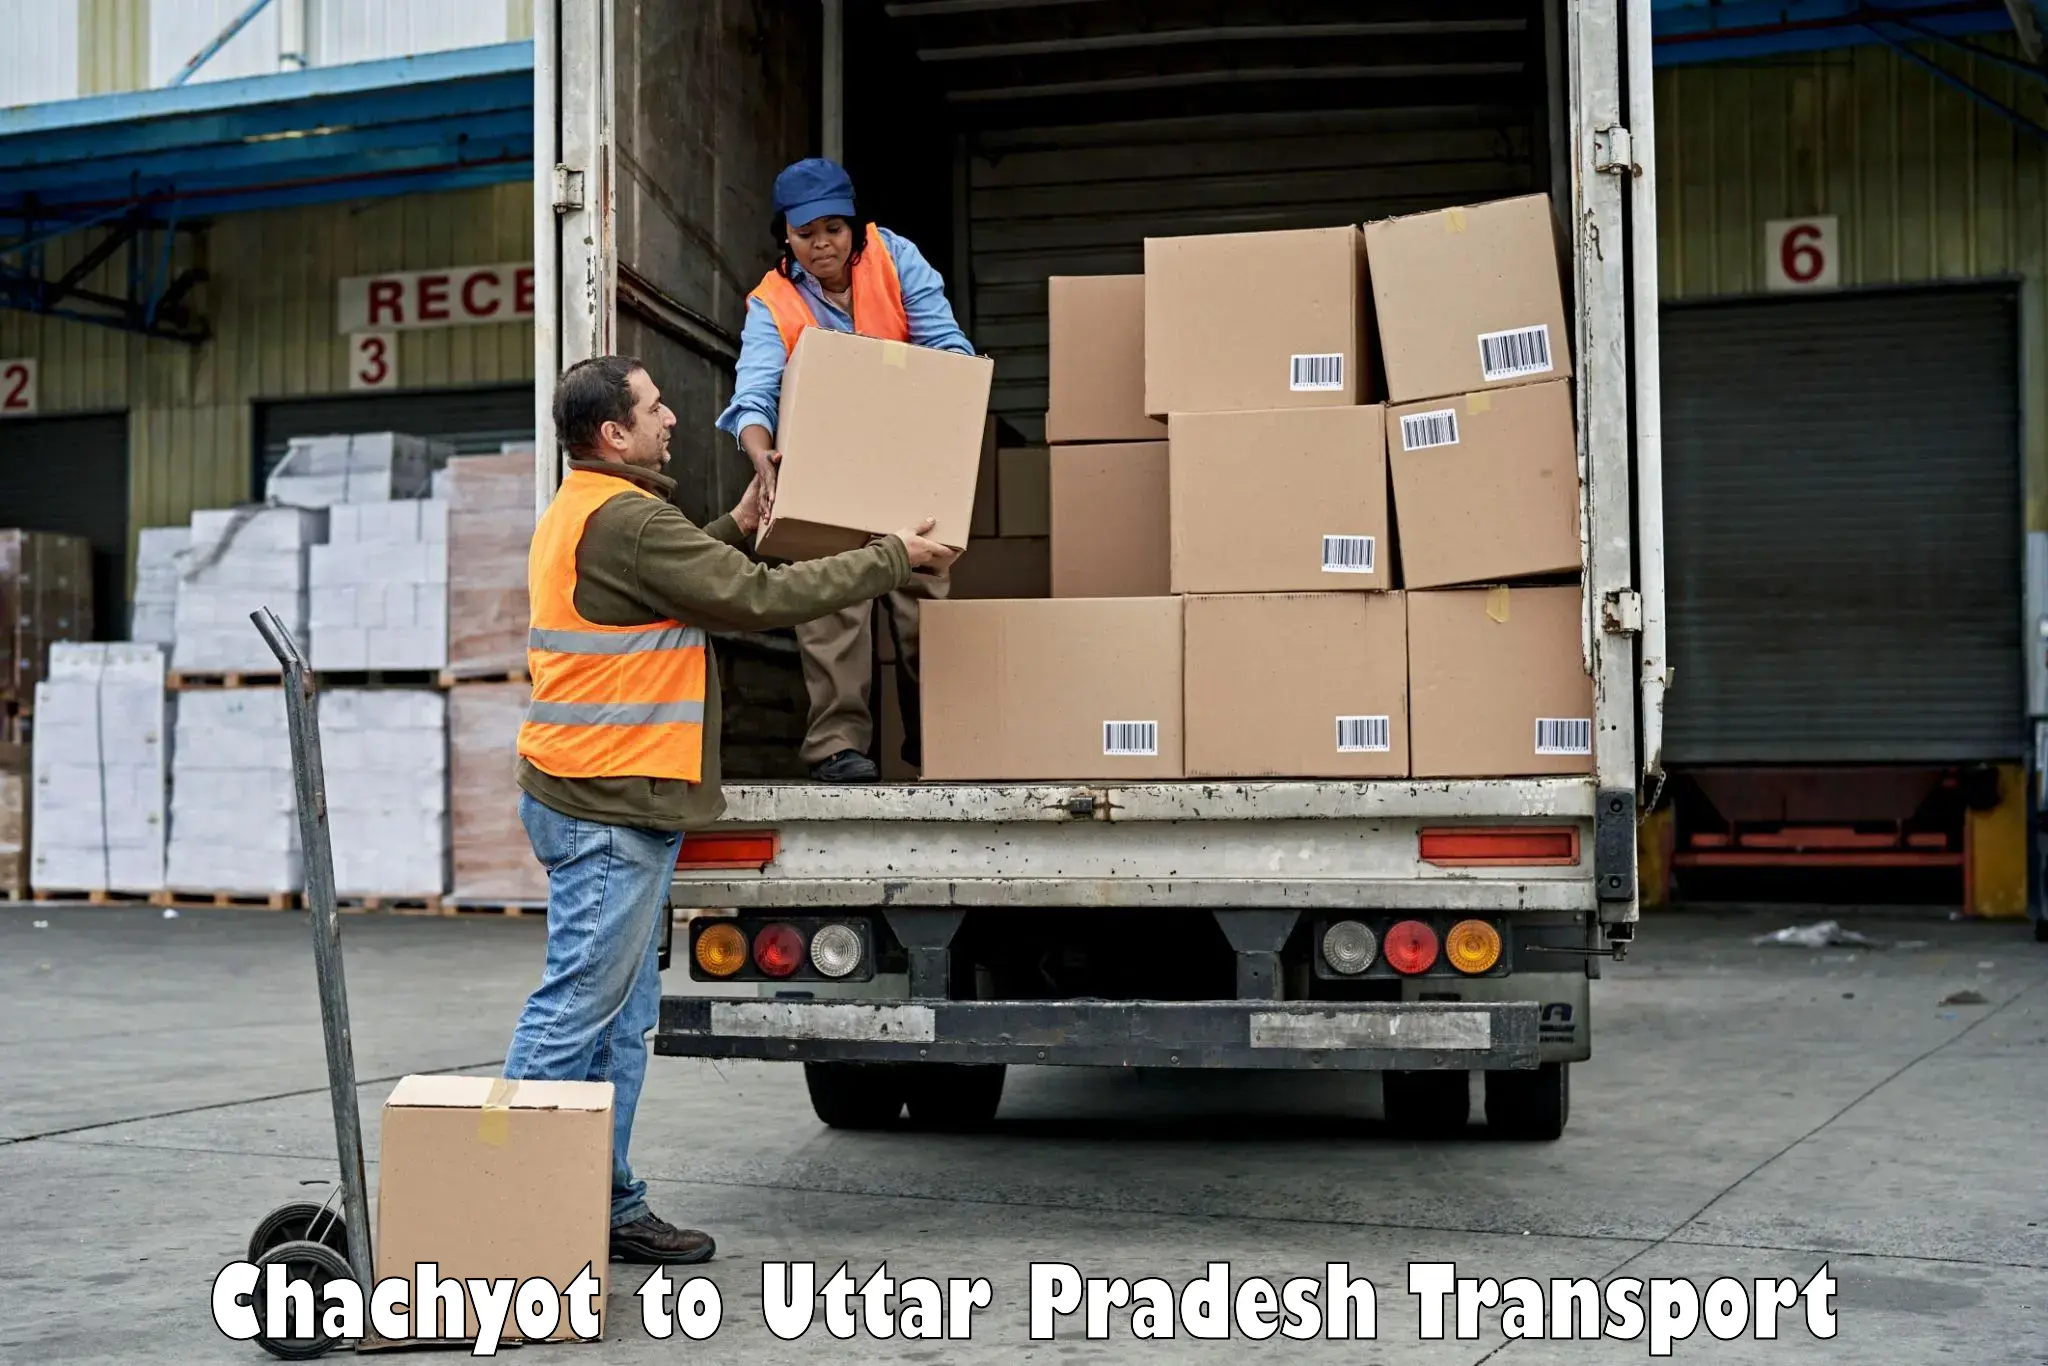 Furniture transport service Chachyot to Akbarpur